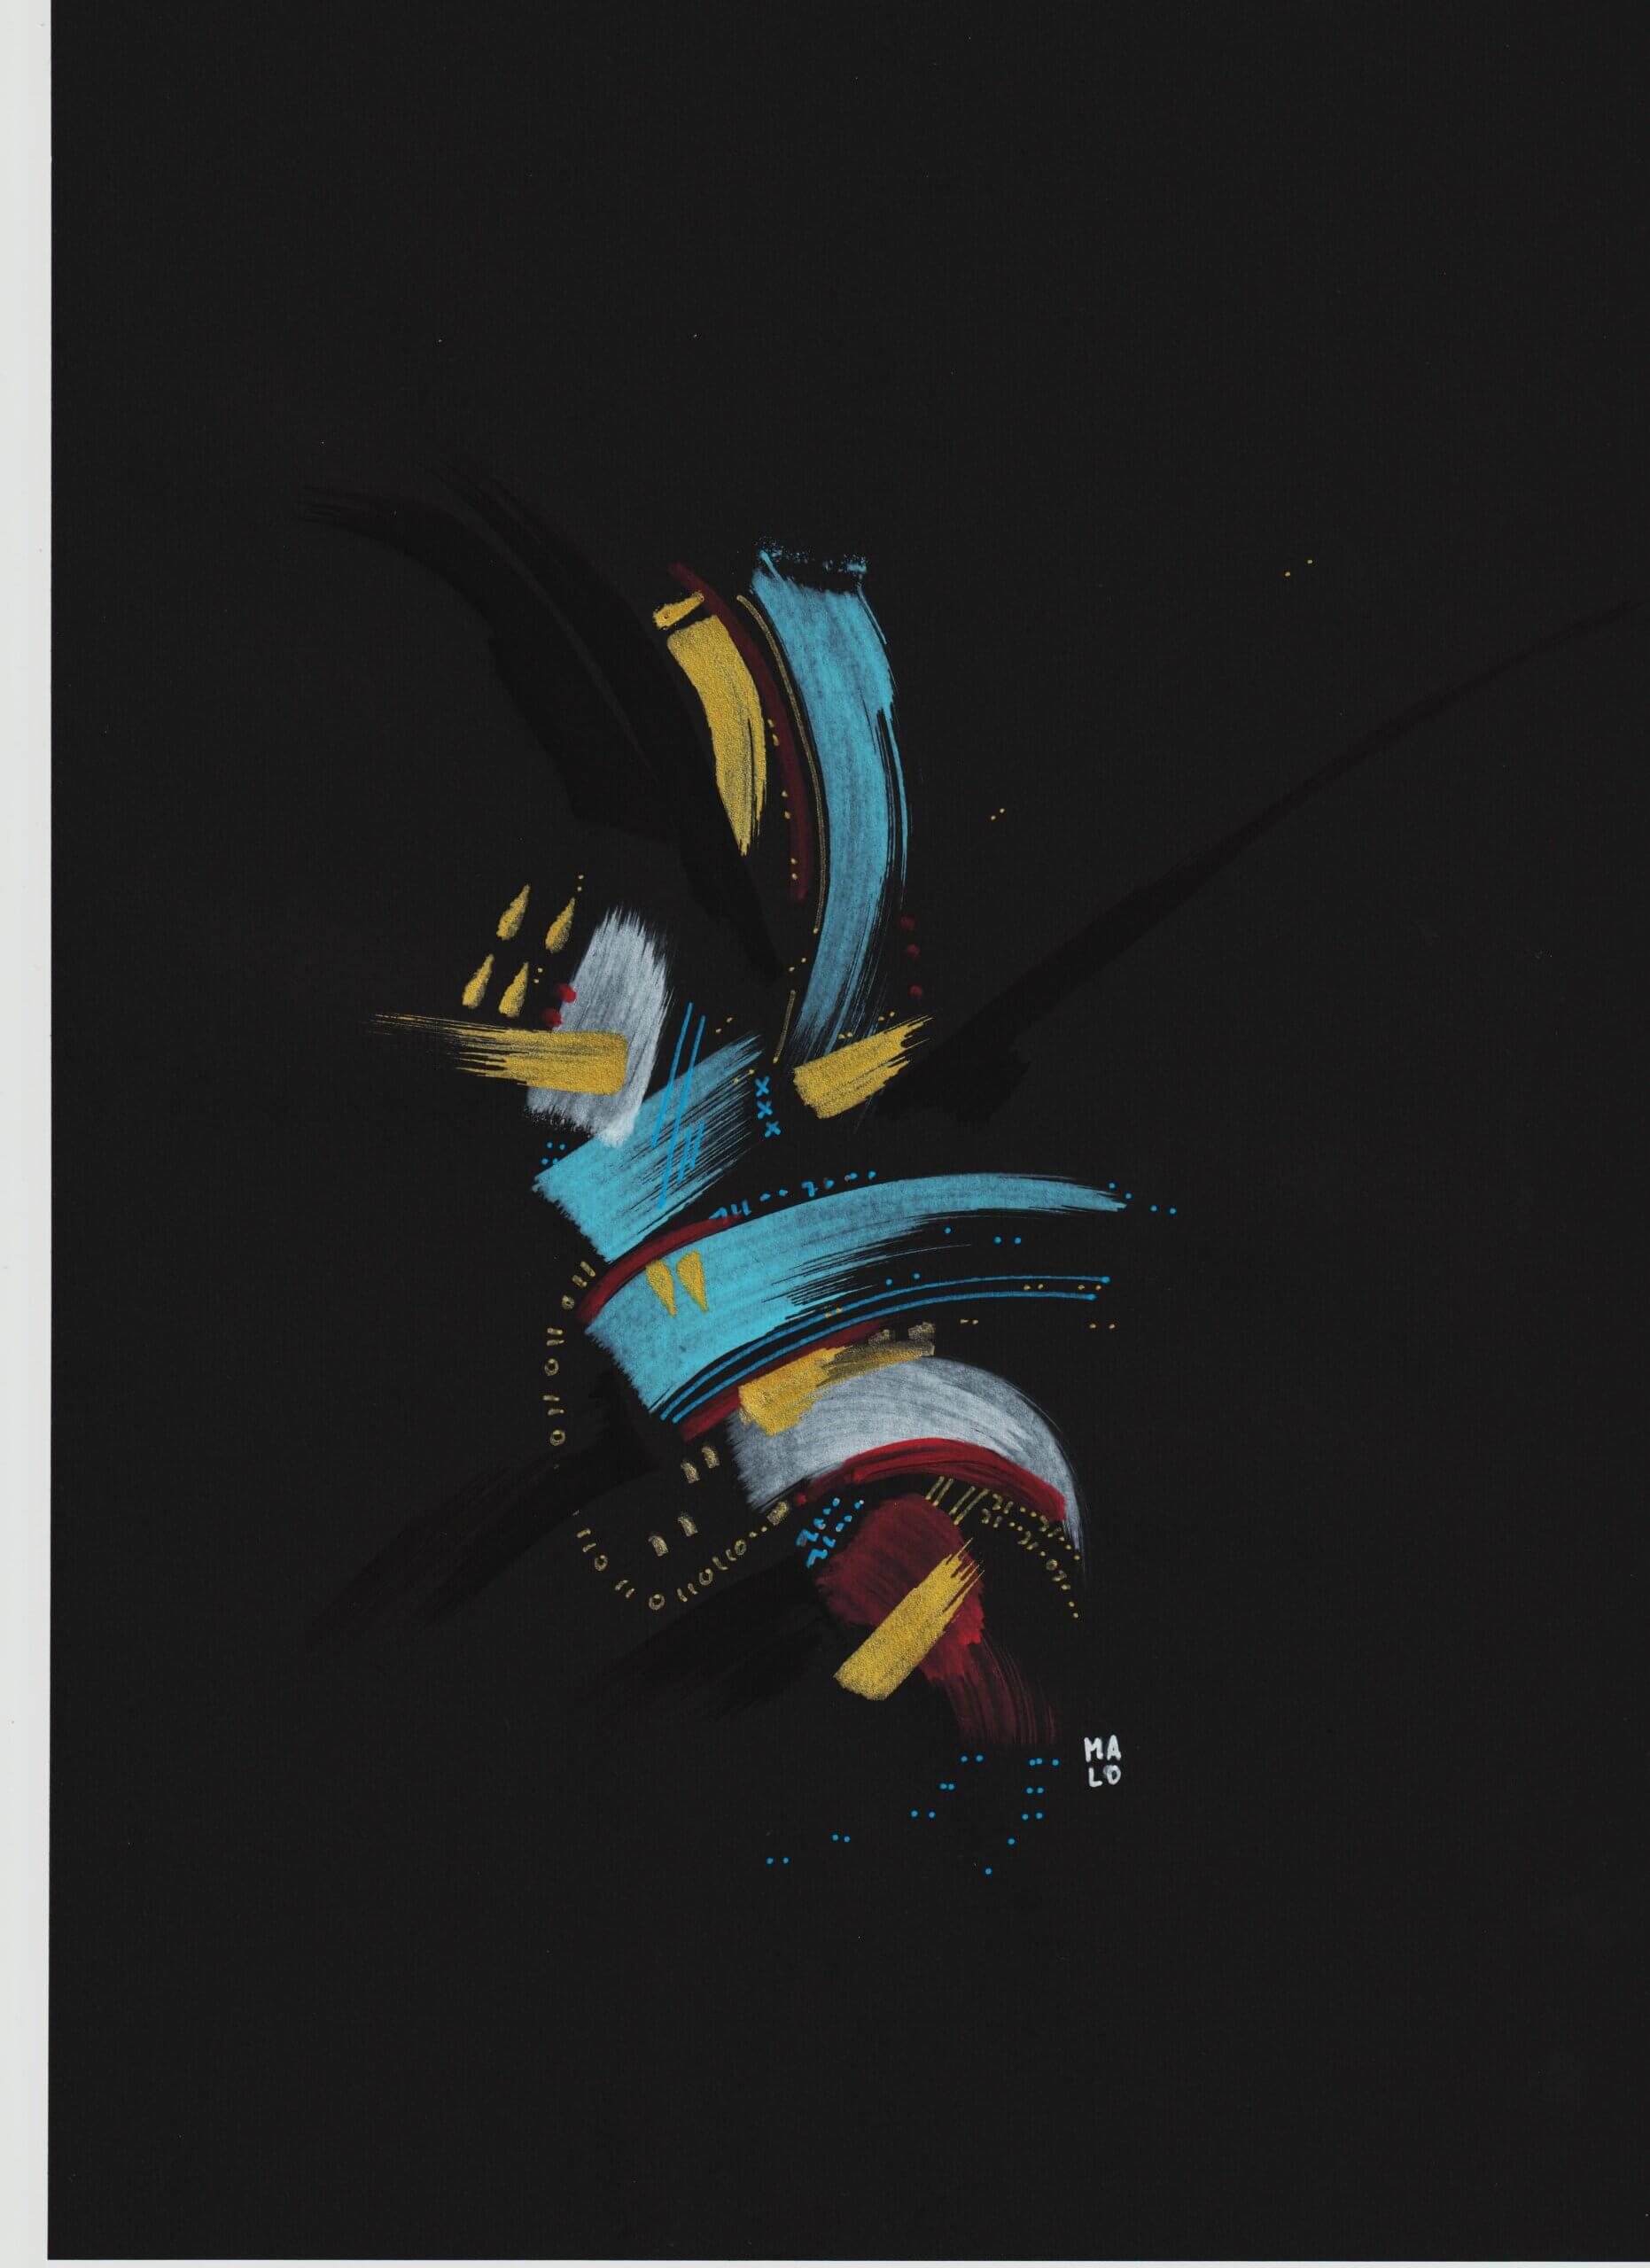 Blue, yellow, and red brushstrokes on a black background